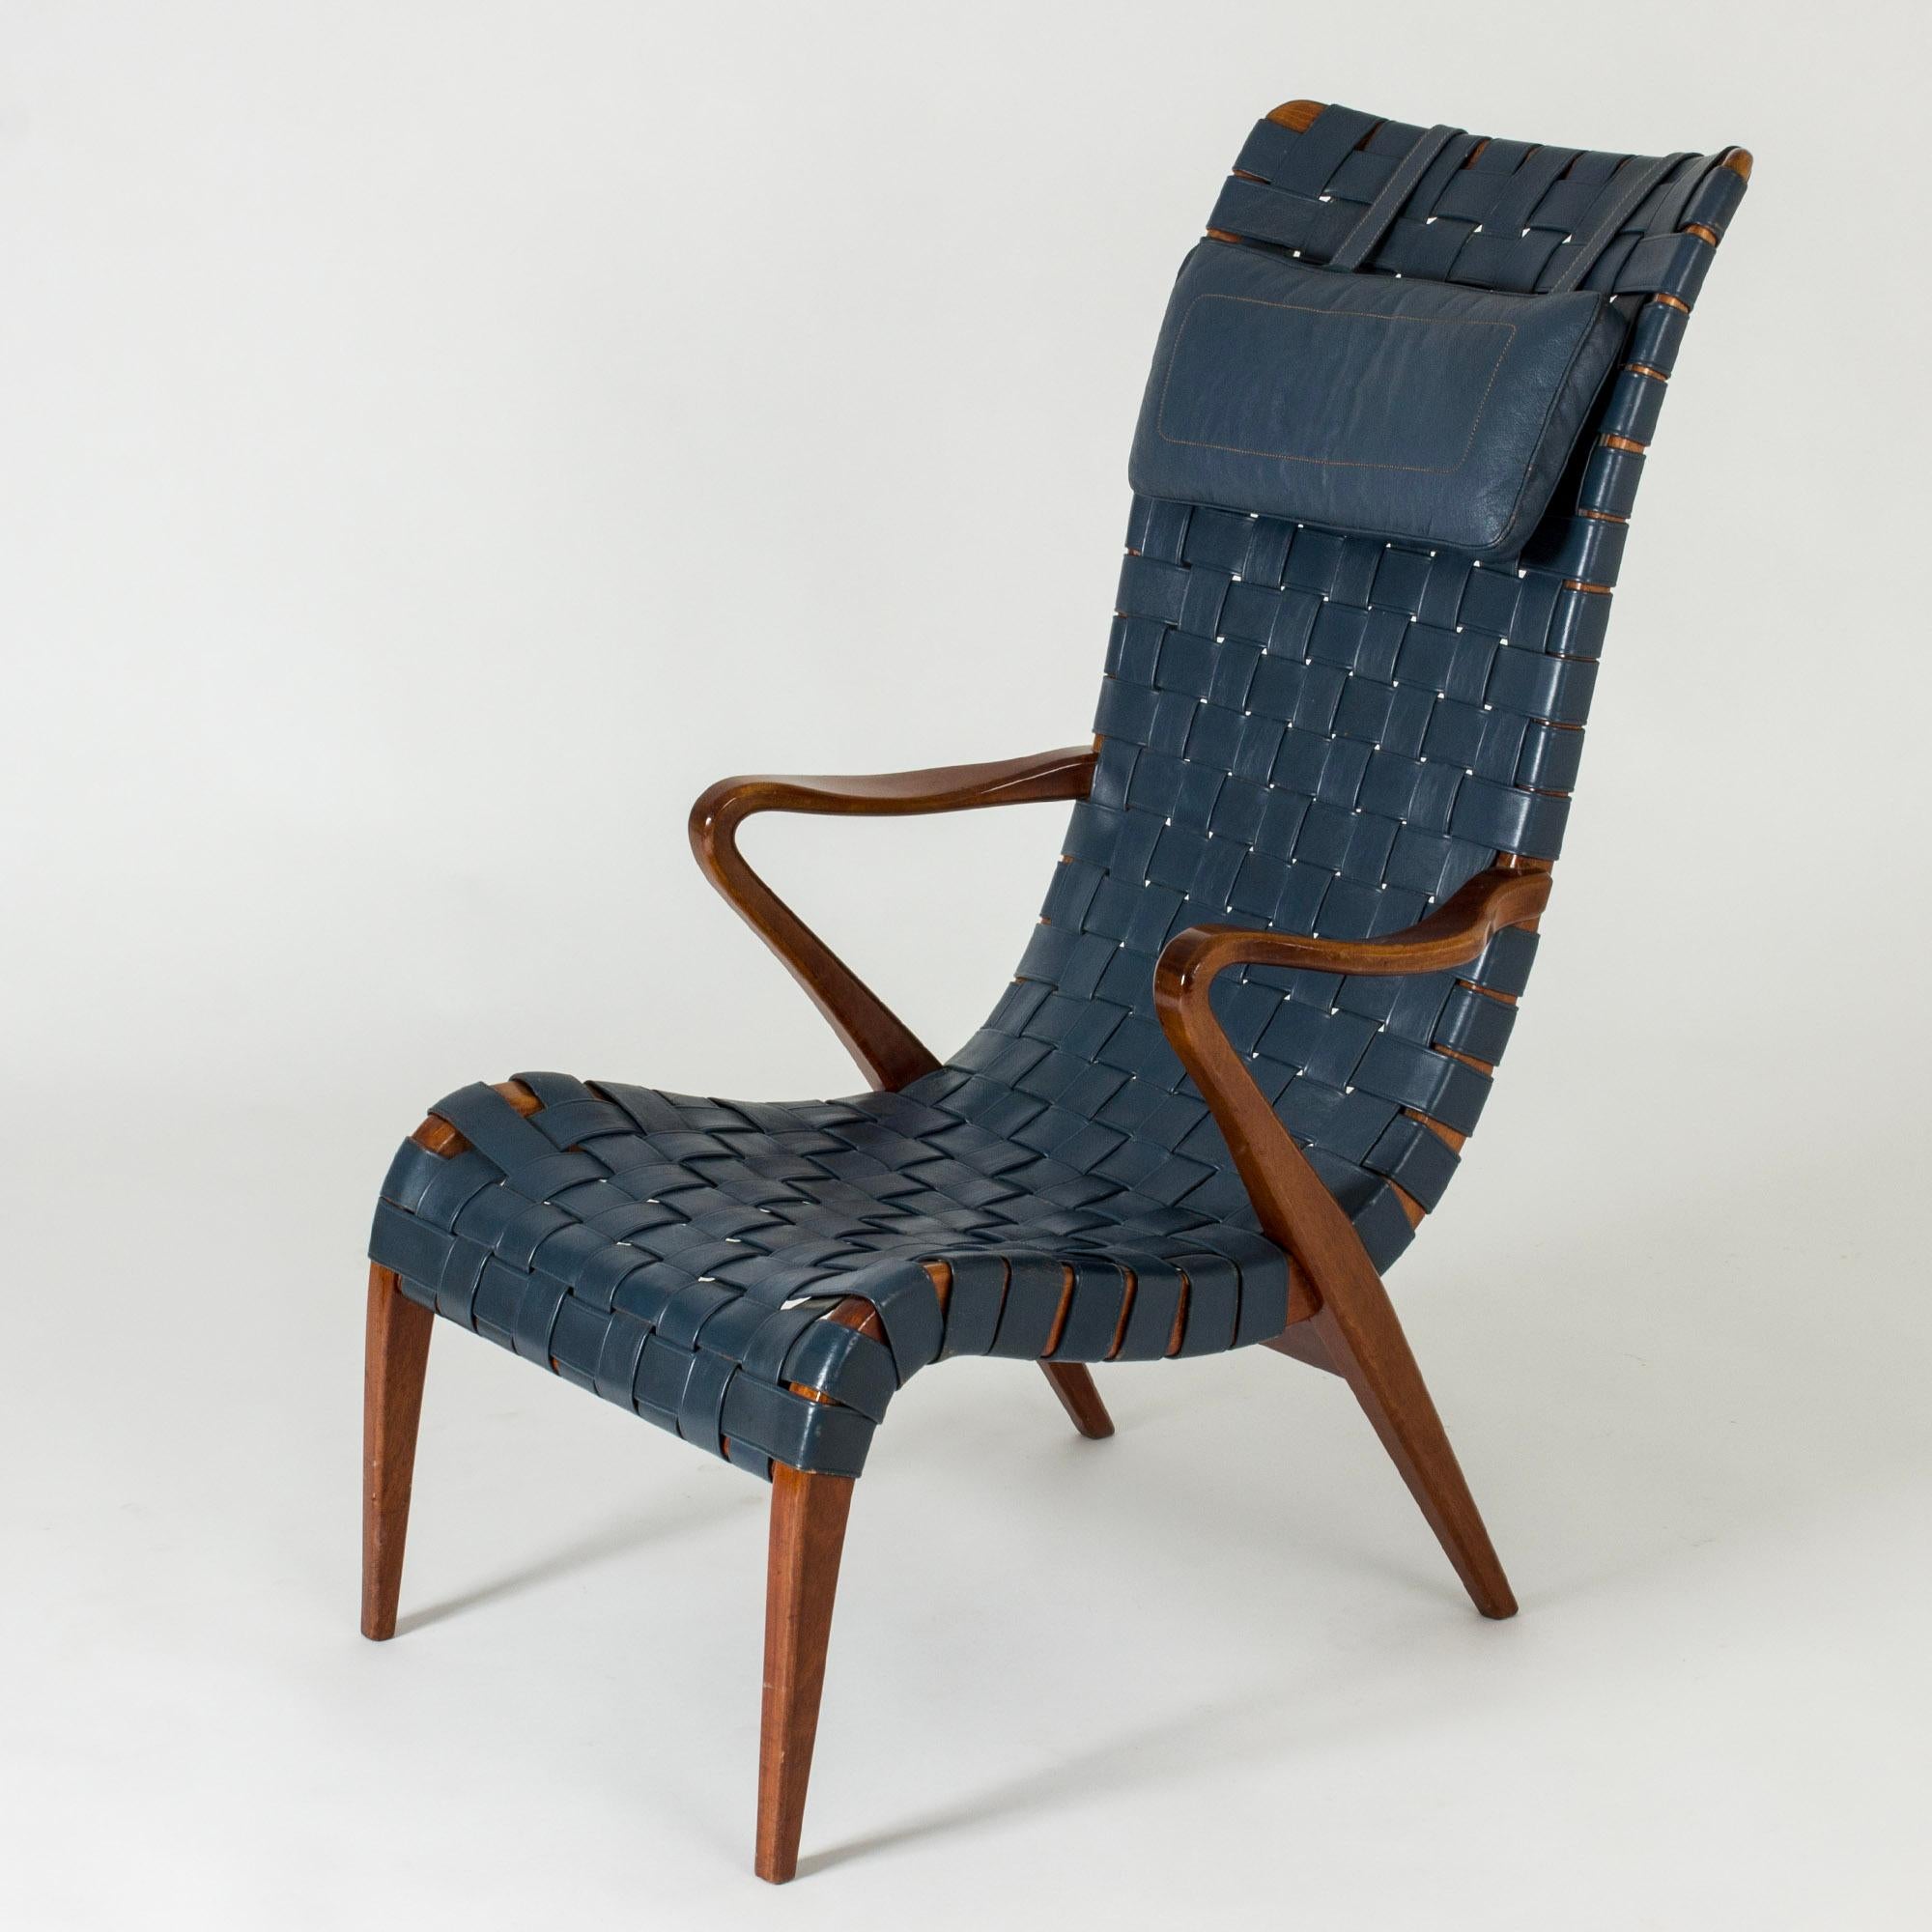 Amazing lounge chair by Axel Larsson, made from teak with original wreathed blue leather. Neck cushion. Bold lines create a very cool silhouette.